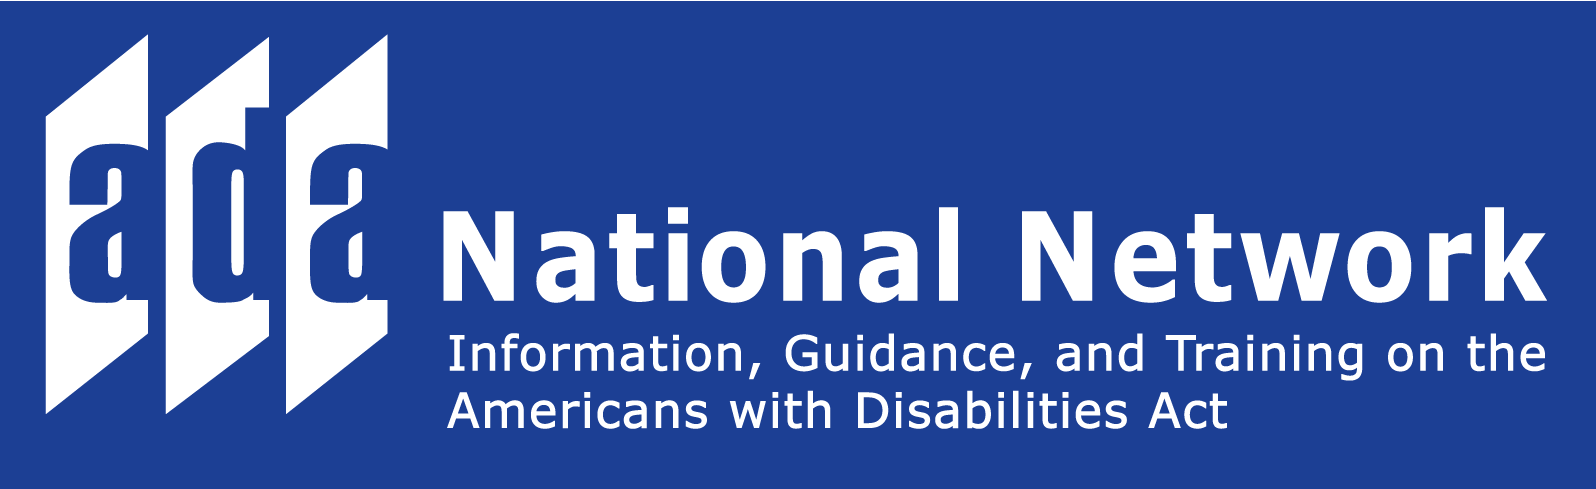 ADA National Network logo in dark blue and white color scheme. Under the logo is the phrase "information, guidance, and training on the Americans with Disabilities Act"